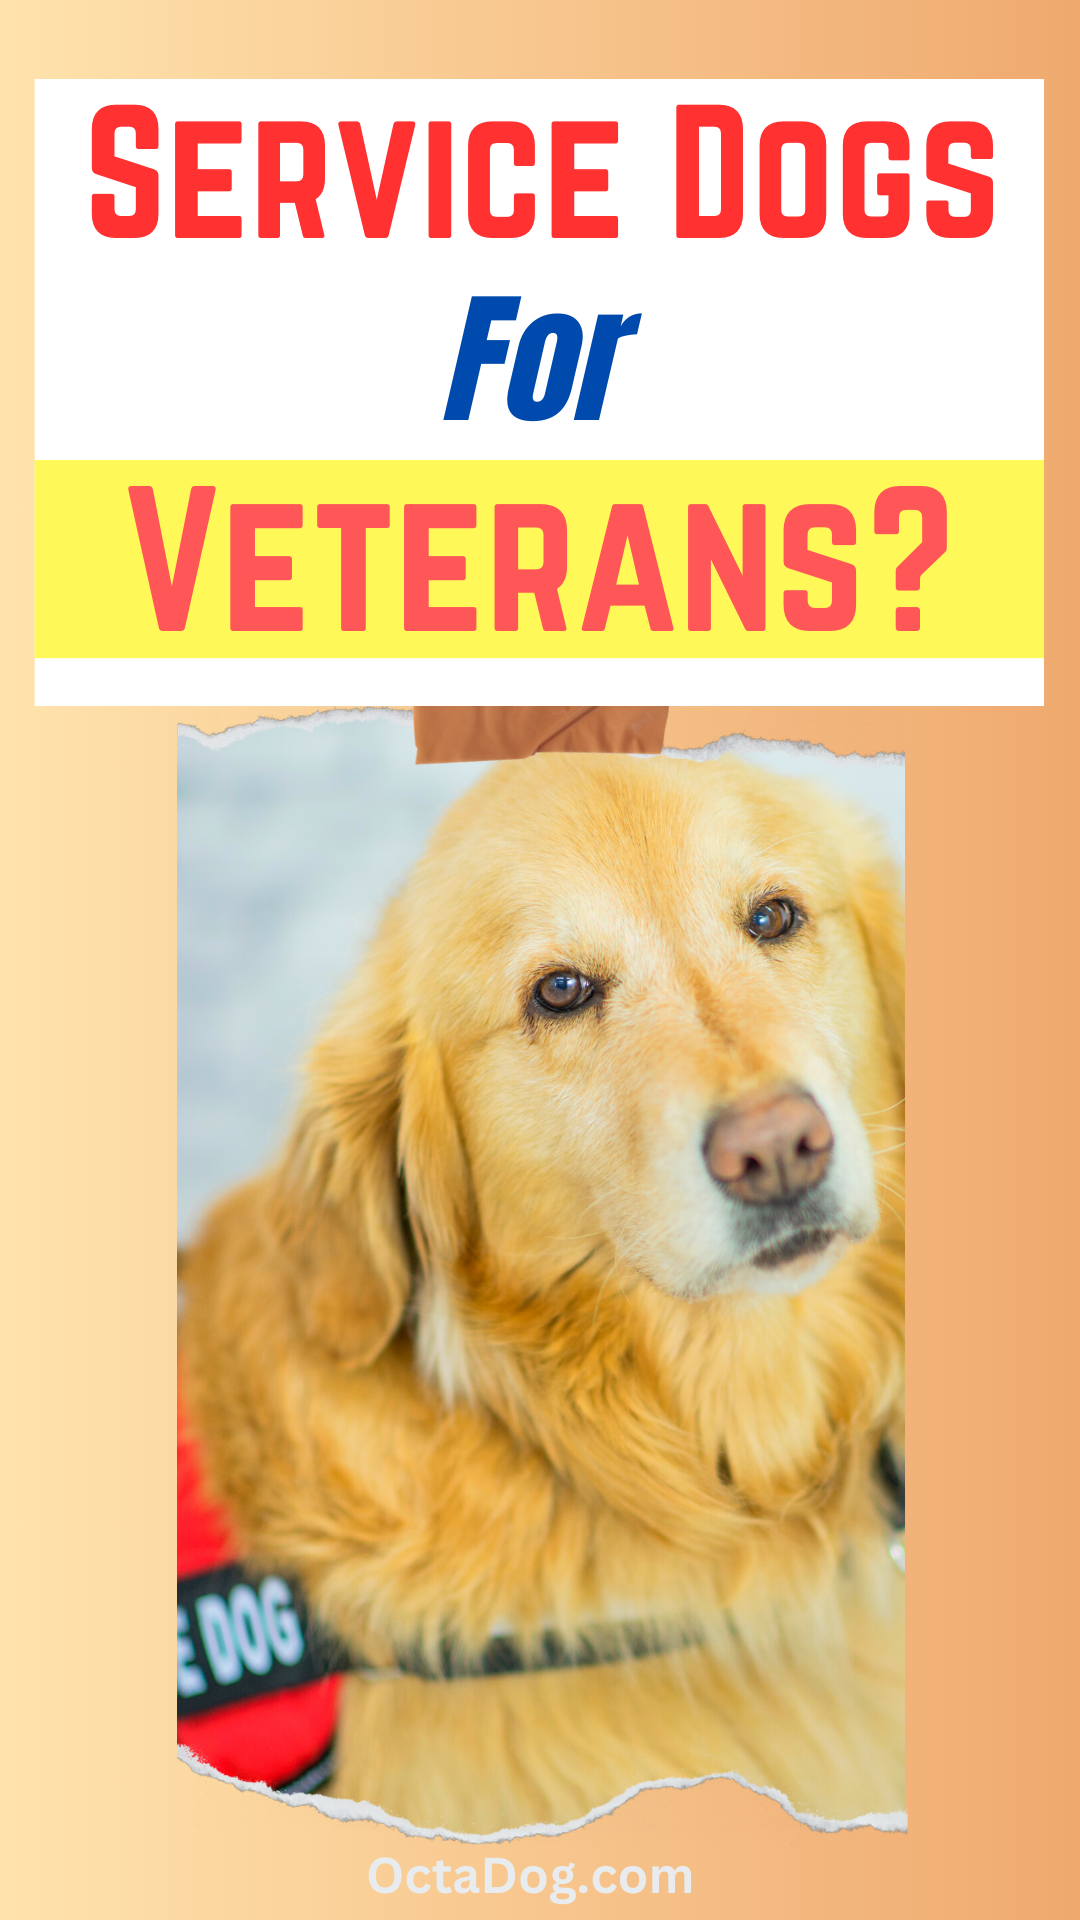 Service Dogs for Veterans / Canva